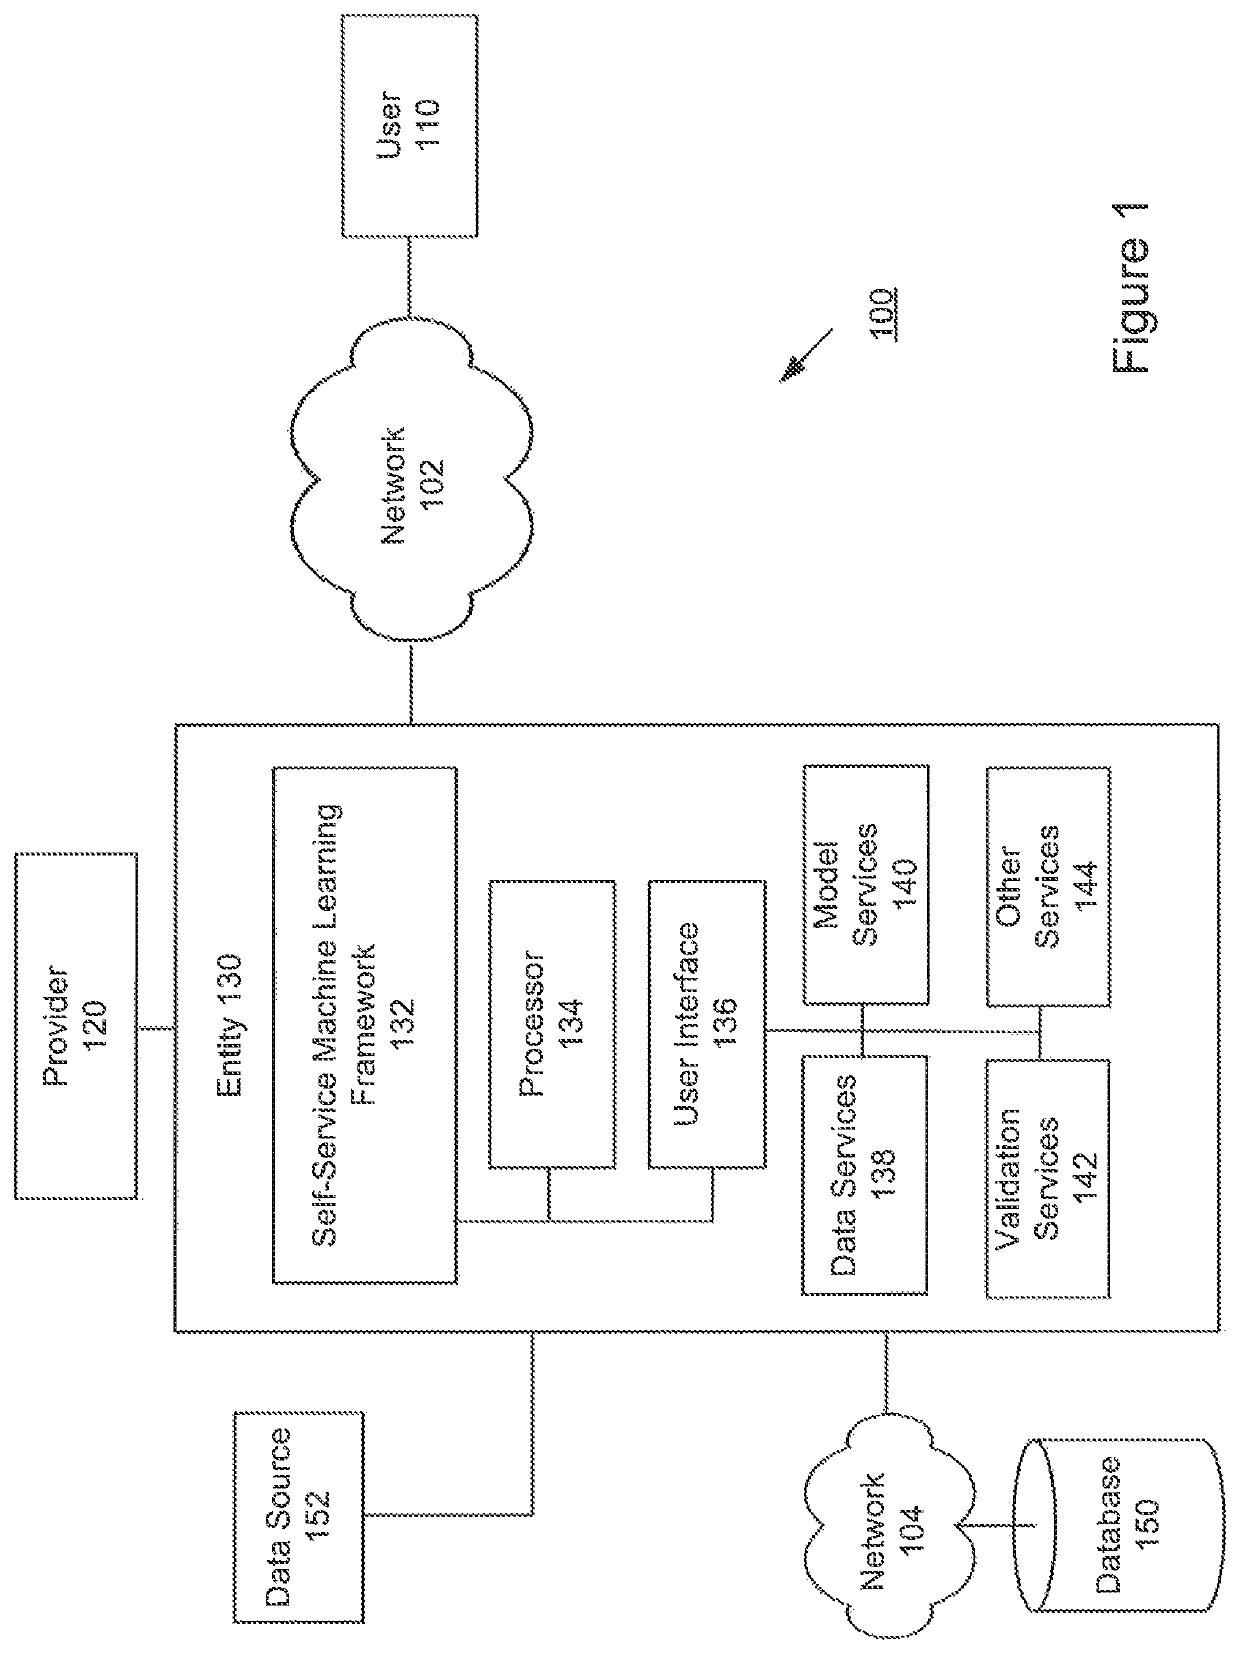 System and method for implementing a self service machine learning framework